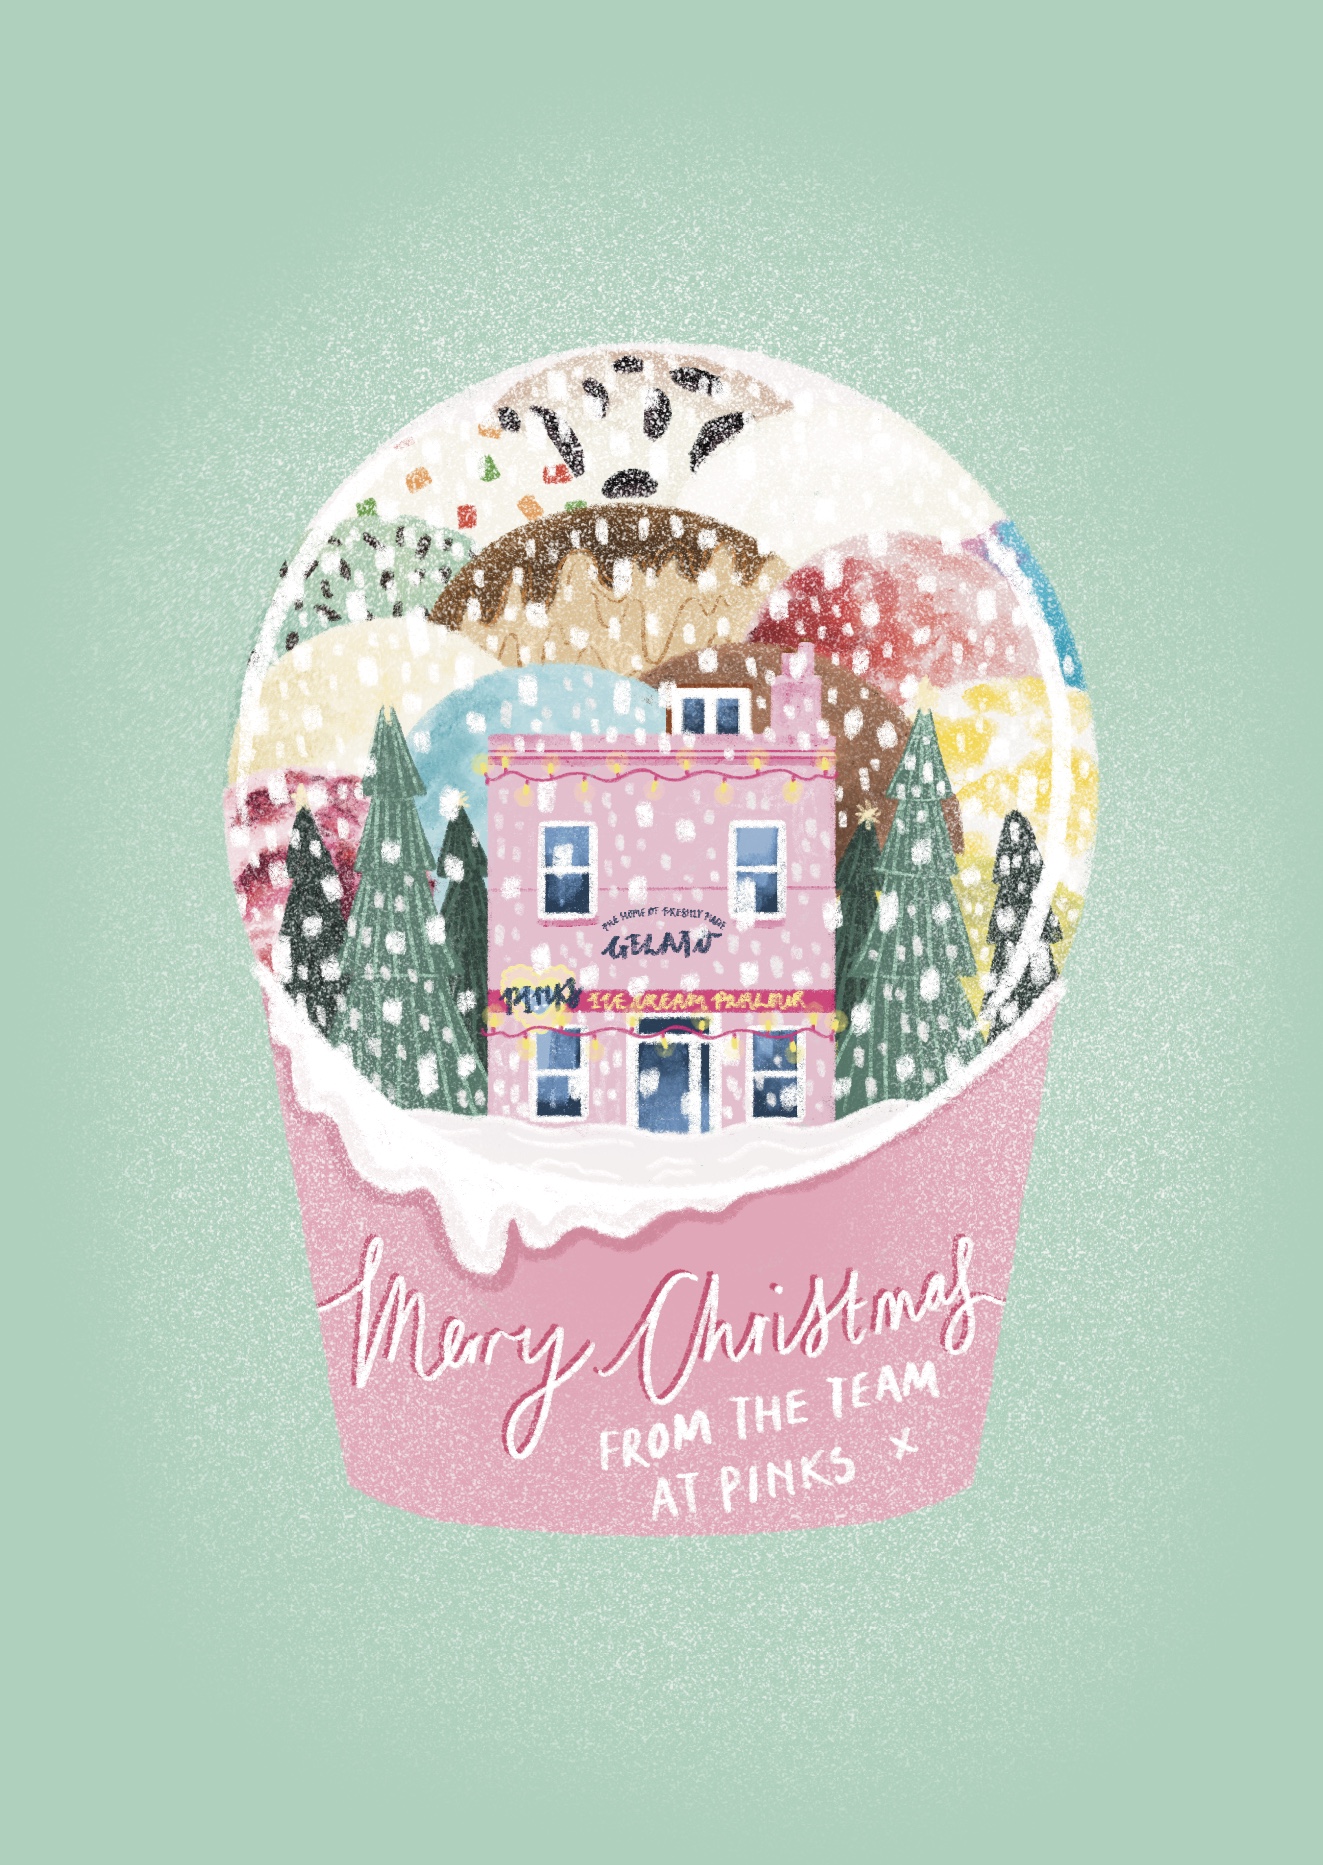 Pinks Parlours 2022 Christmas Card - featuring the Pinks Gelato Parlour in a pink snowglobe, with mountains of gelato scoops behind it.